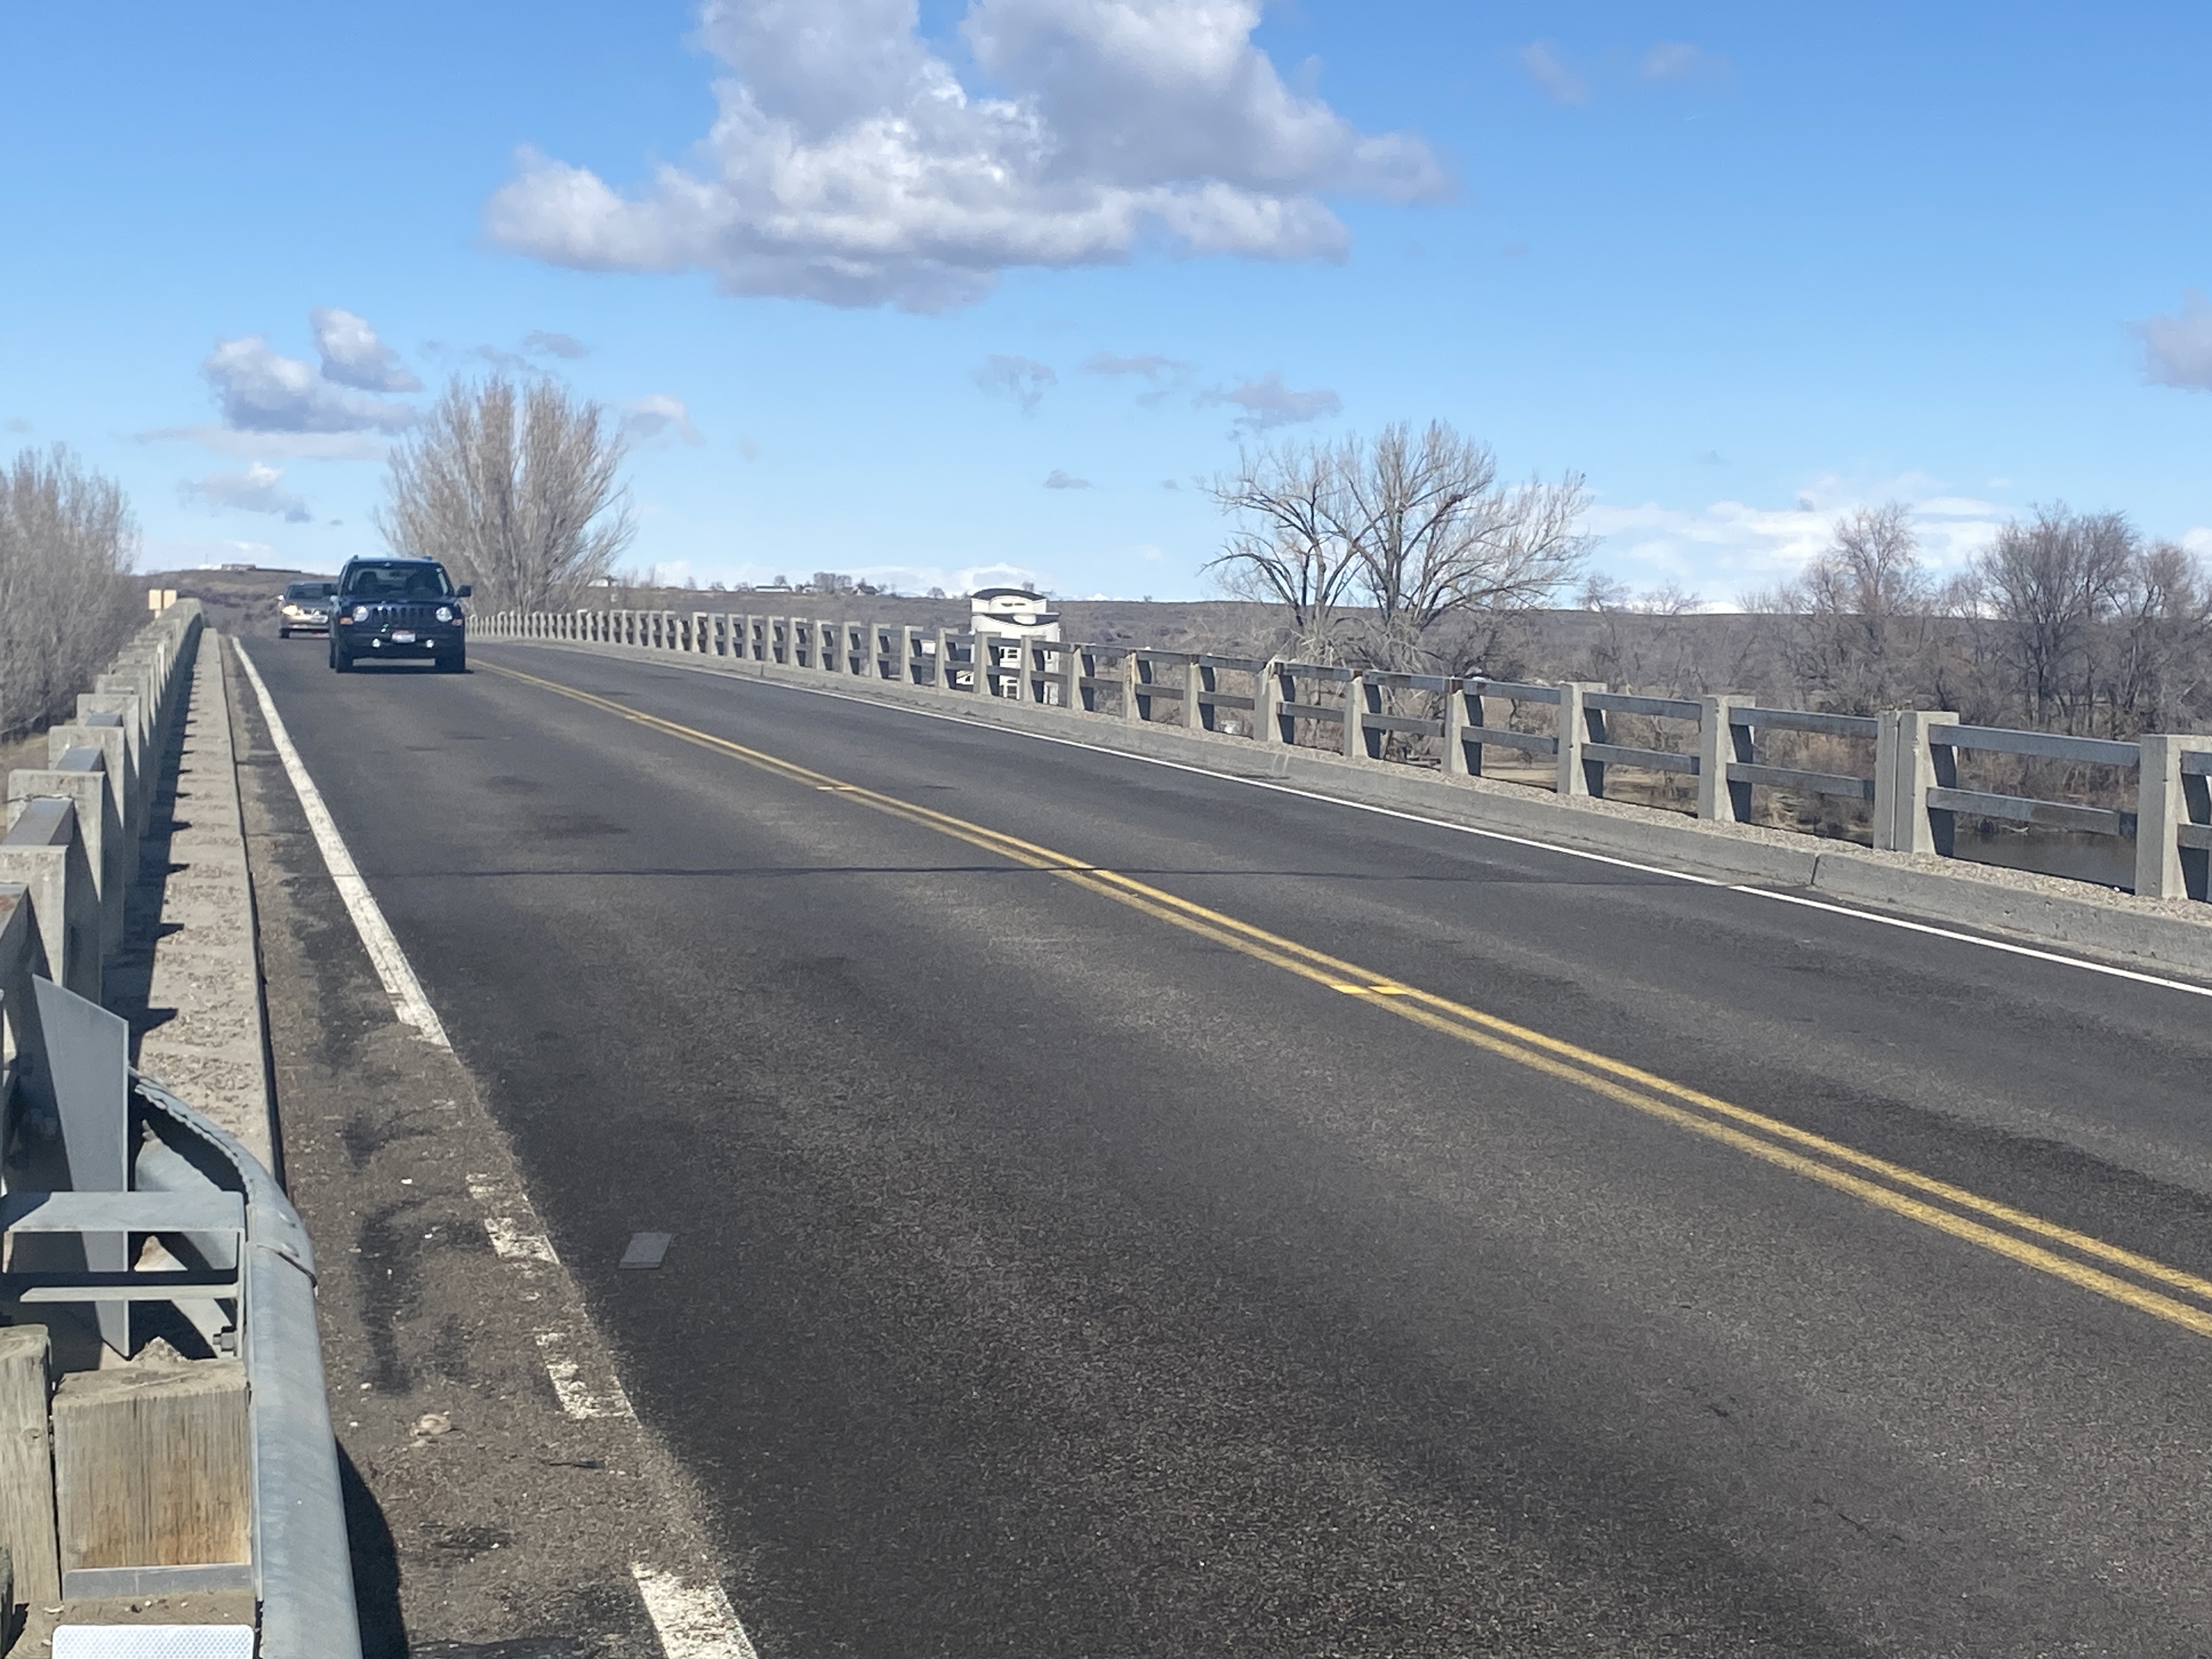 View at street level of cars driving over Snake River Bridge 